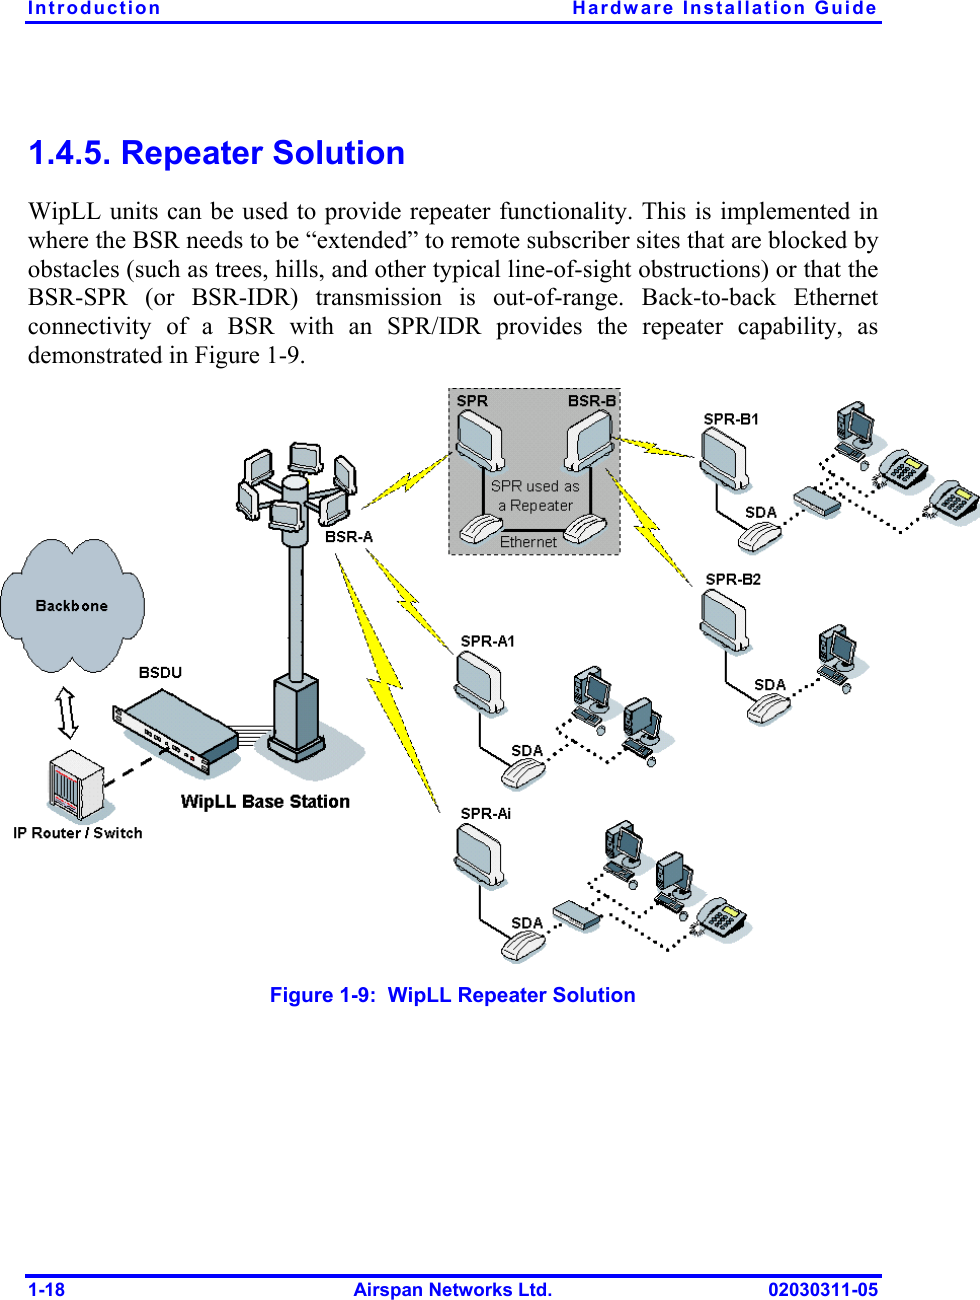 Introduction  Hardware Installation Guide 1-18  Airspan Networks Ltd.  02030311-05 1.4.5. Repeater Solution WipLL units can be used to provide repeater functionality. This is implemented in where the BSR needs to be “extended” to remote subscriber sites that are blocked by obstacles (such as trees, hills, and other typical line-of-sight obstructions) or that the BSR-SPR (or BSR-IDR) transmission is out-of-range. Back-to-back Ethernet connectivity of a BSR with an SPR/IDR provides the repeater capability, as demonstrated in Figure  1-9.  Figure  1-9:  WipLL Repeater Solution 